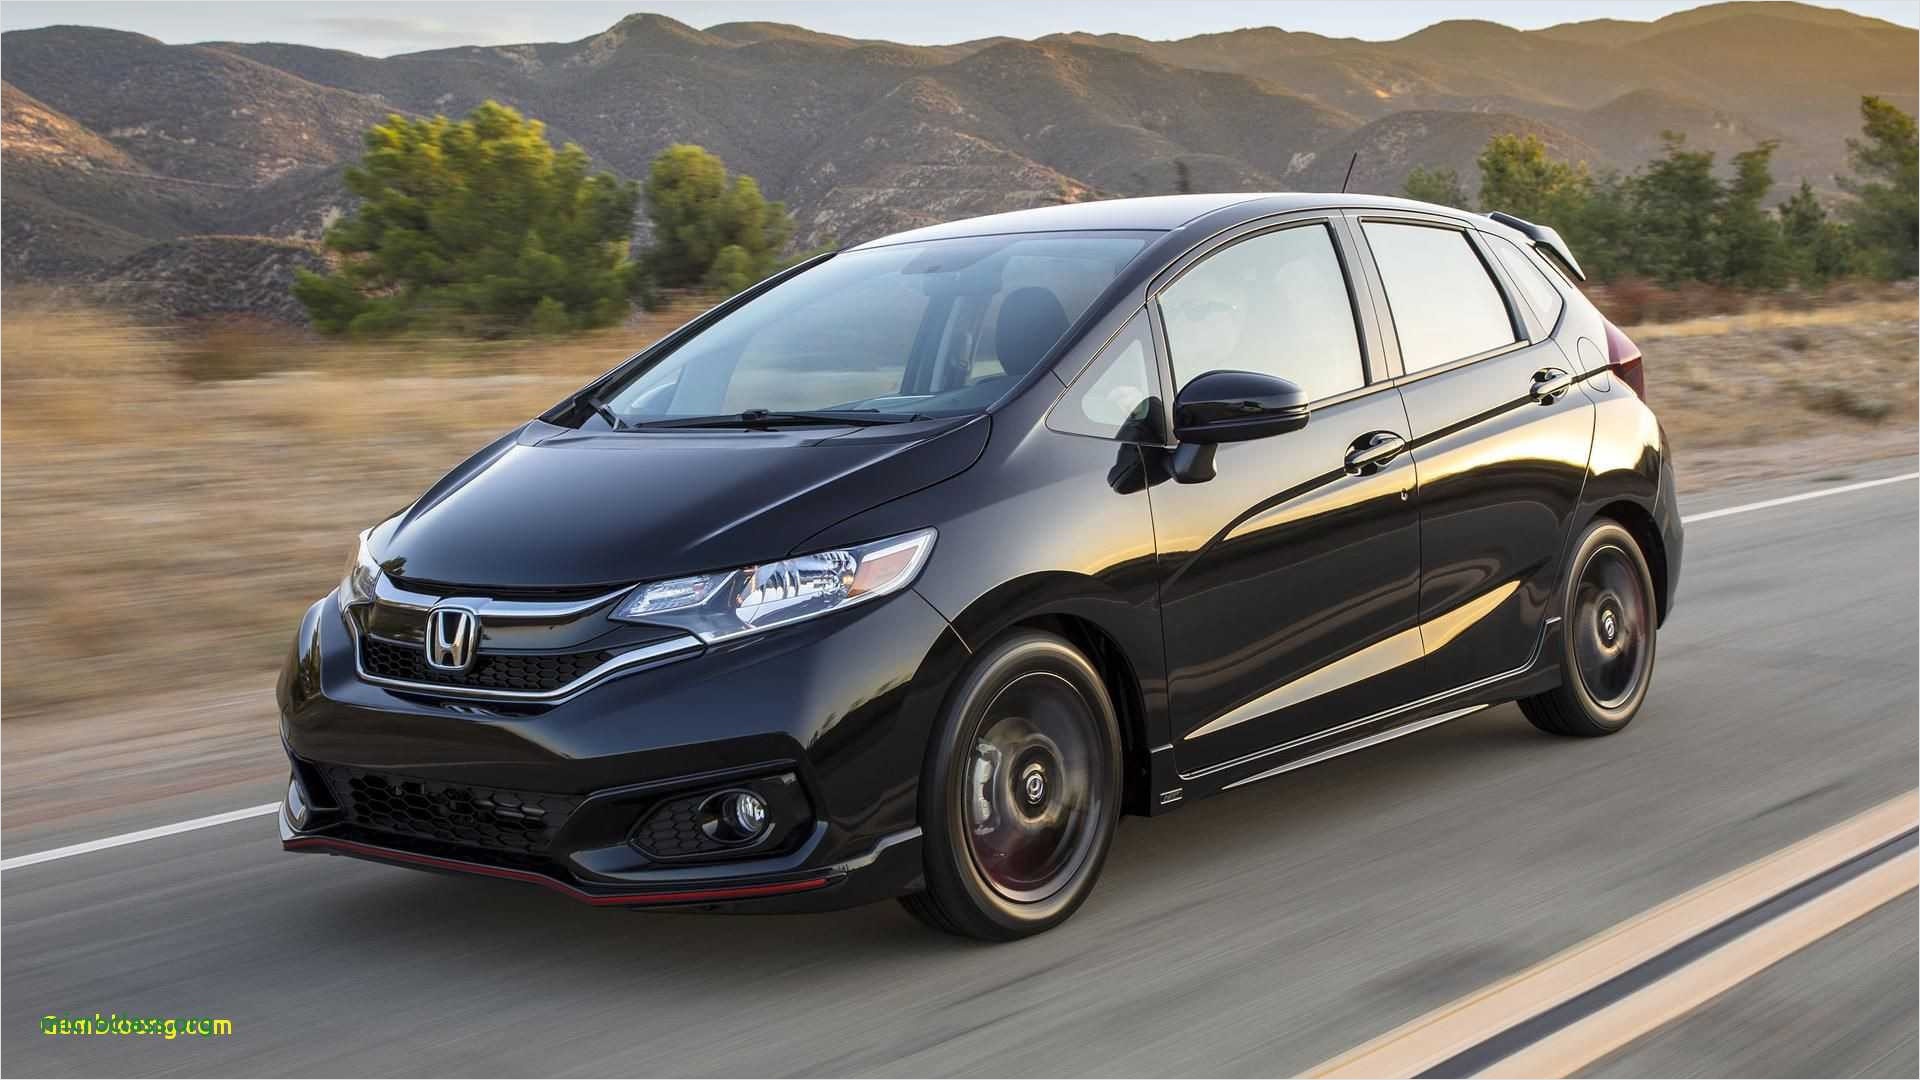 cool review about honda fit pictures with extraordinary images